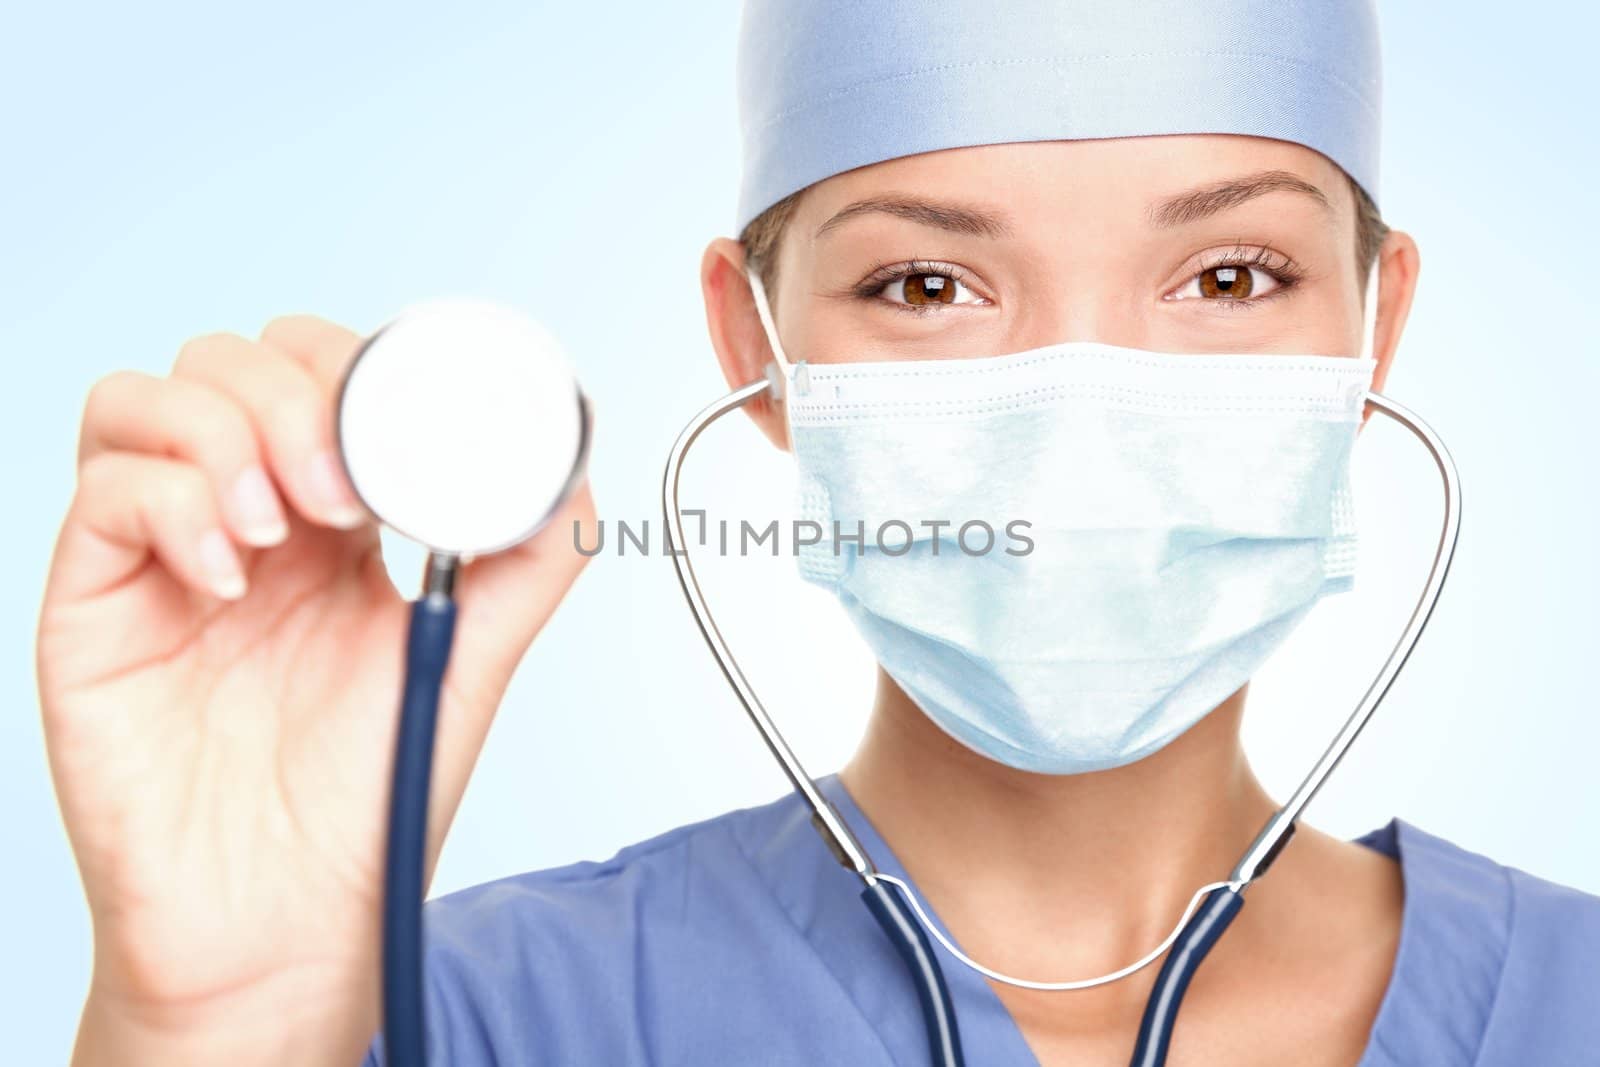 Young doctor / surgeon showing stethoscope wearing surgeon mask looking at camera. Asian / Caucasian female model. 